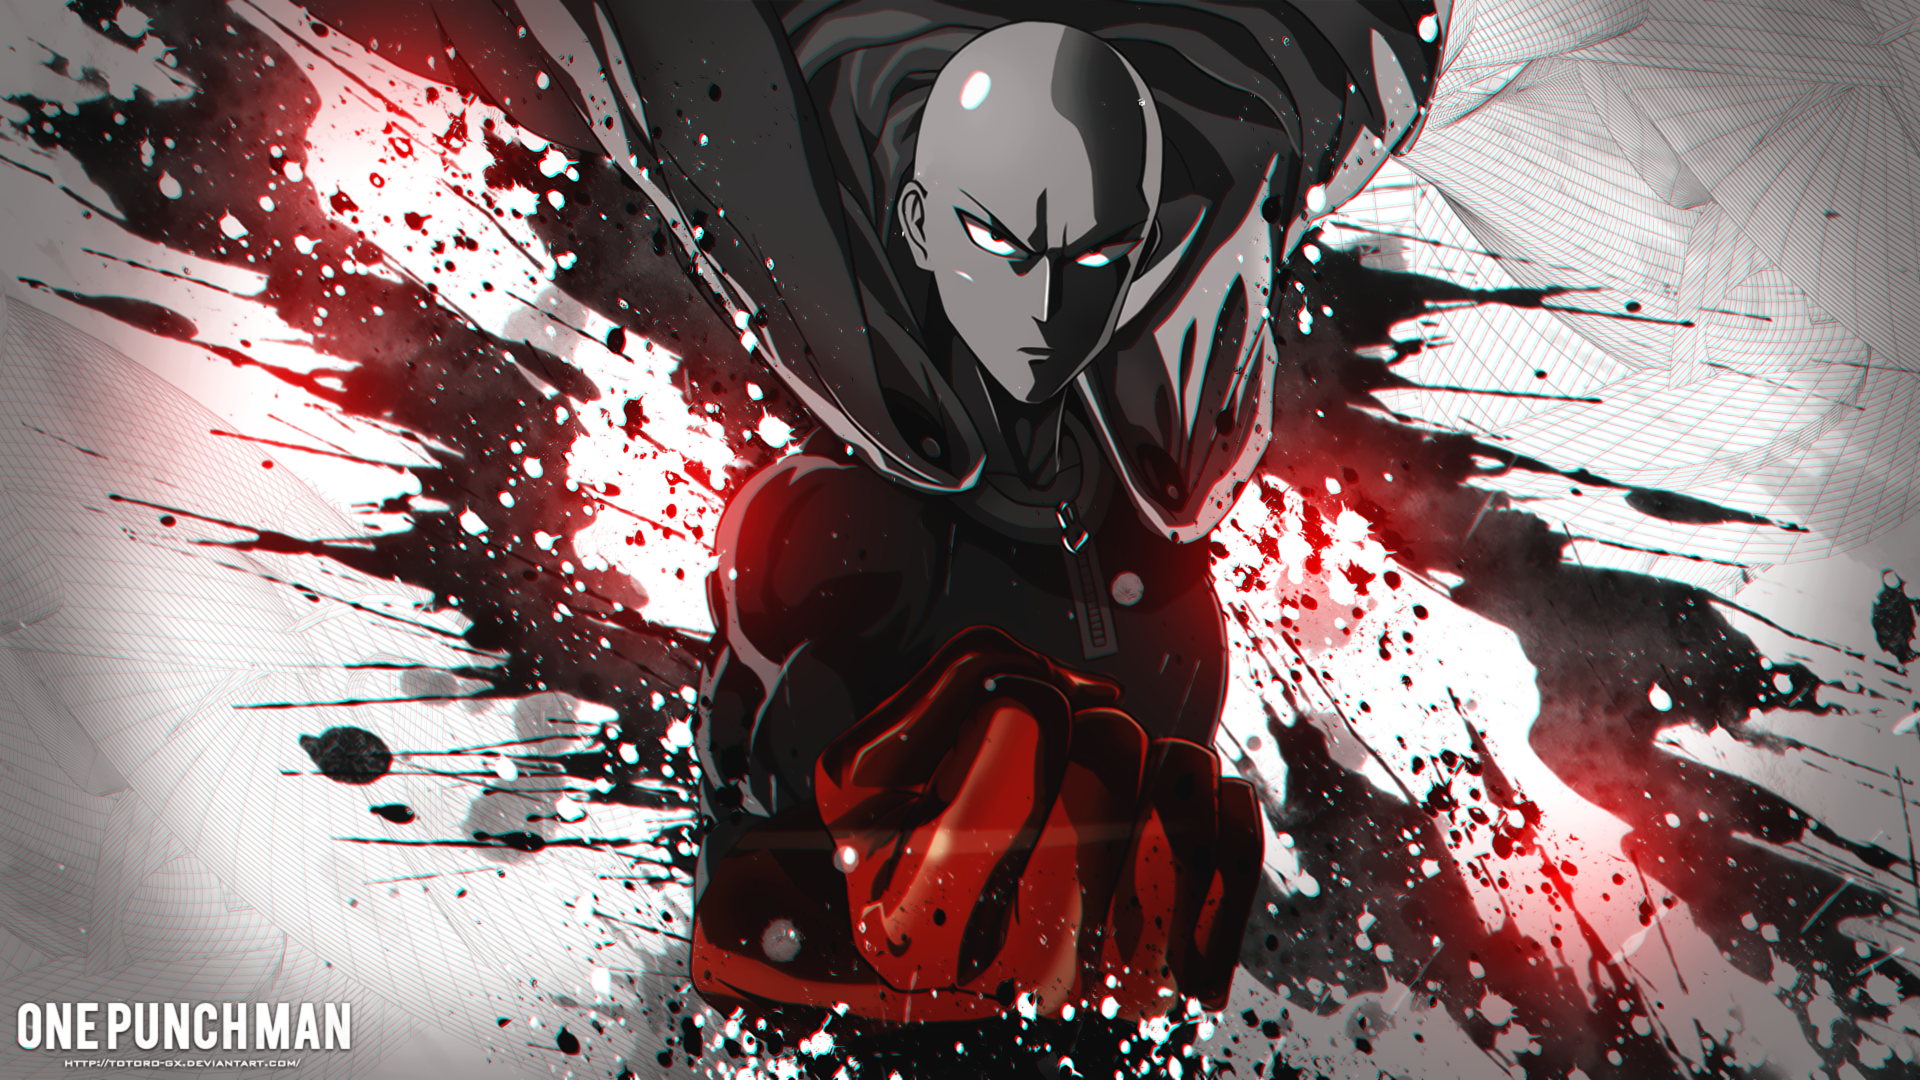 800x1280 Saitama One Punch Man Artwork Nexus 7,Samsung Galaxy Tab 10,Note  Android Tablets ,HD 4k Wallpapers,Images,Backgrounds,Photos and Pictures